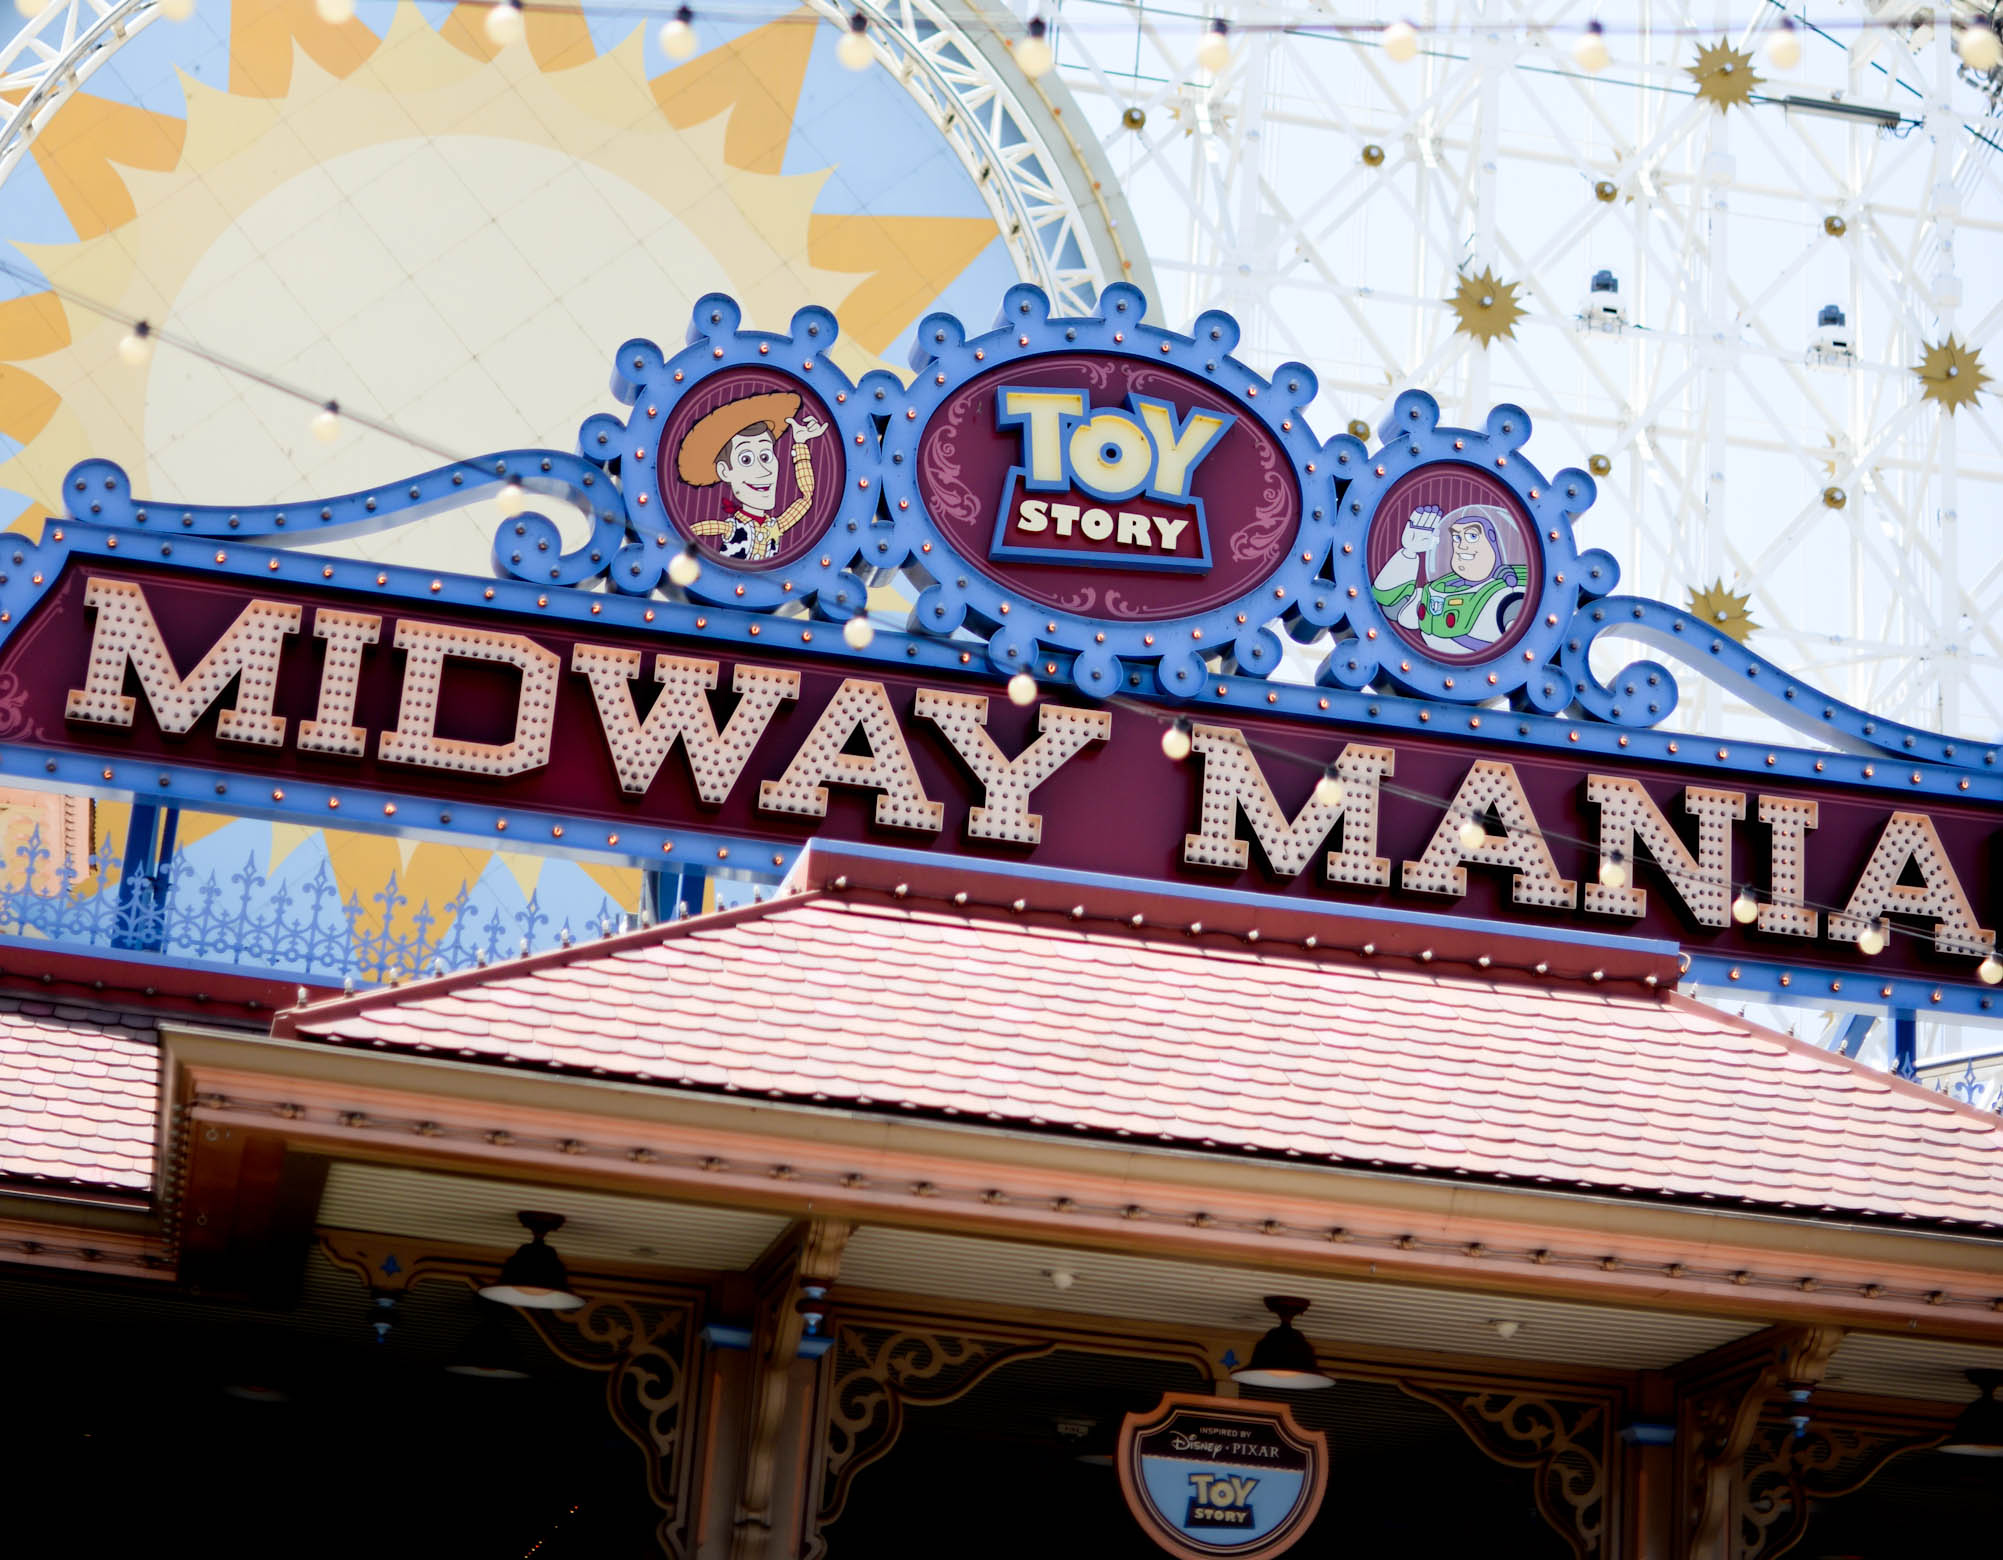 Disneyland Launching New FastPass System for a Fee